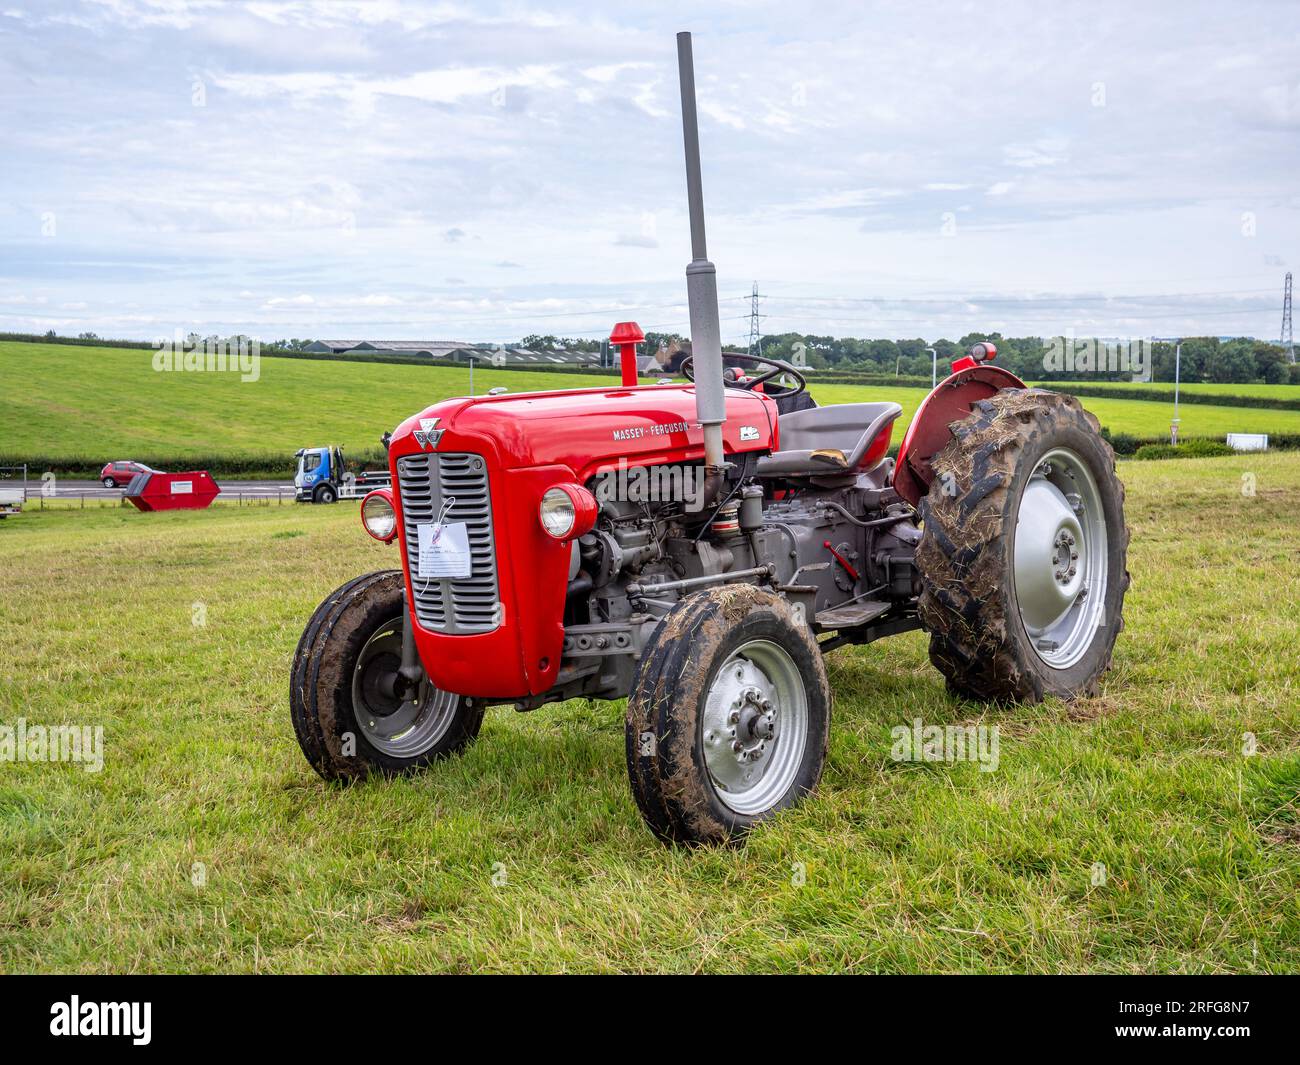 Massey Ferguson Tractor seen at a vintage tractor show Stock Photo